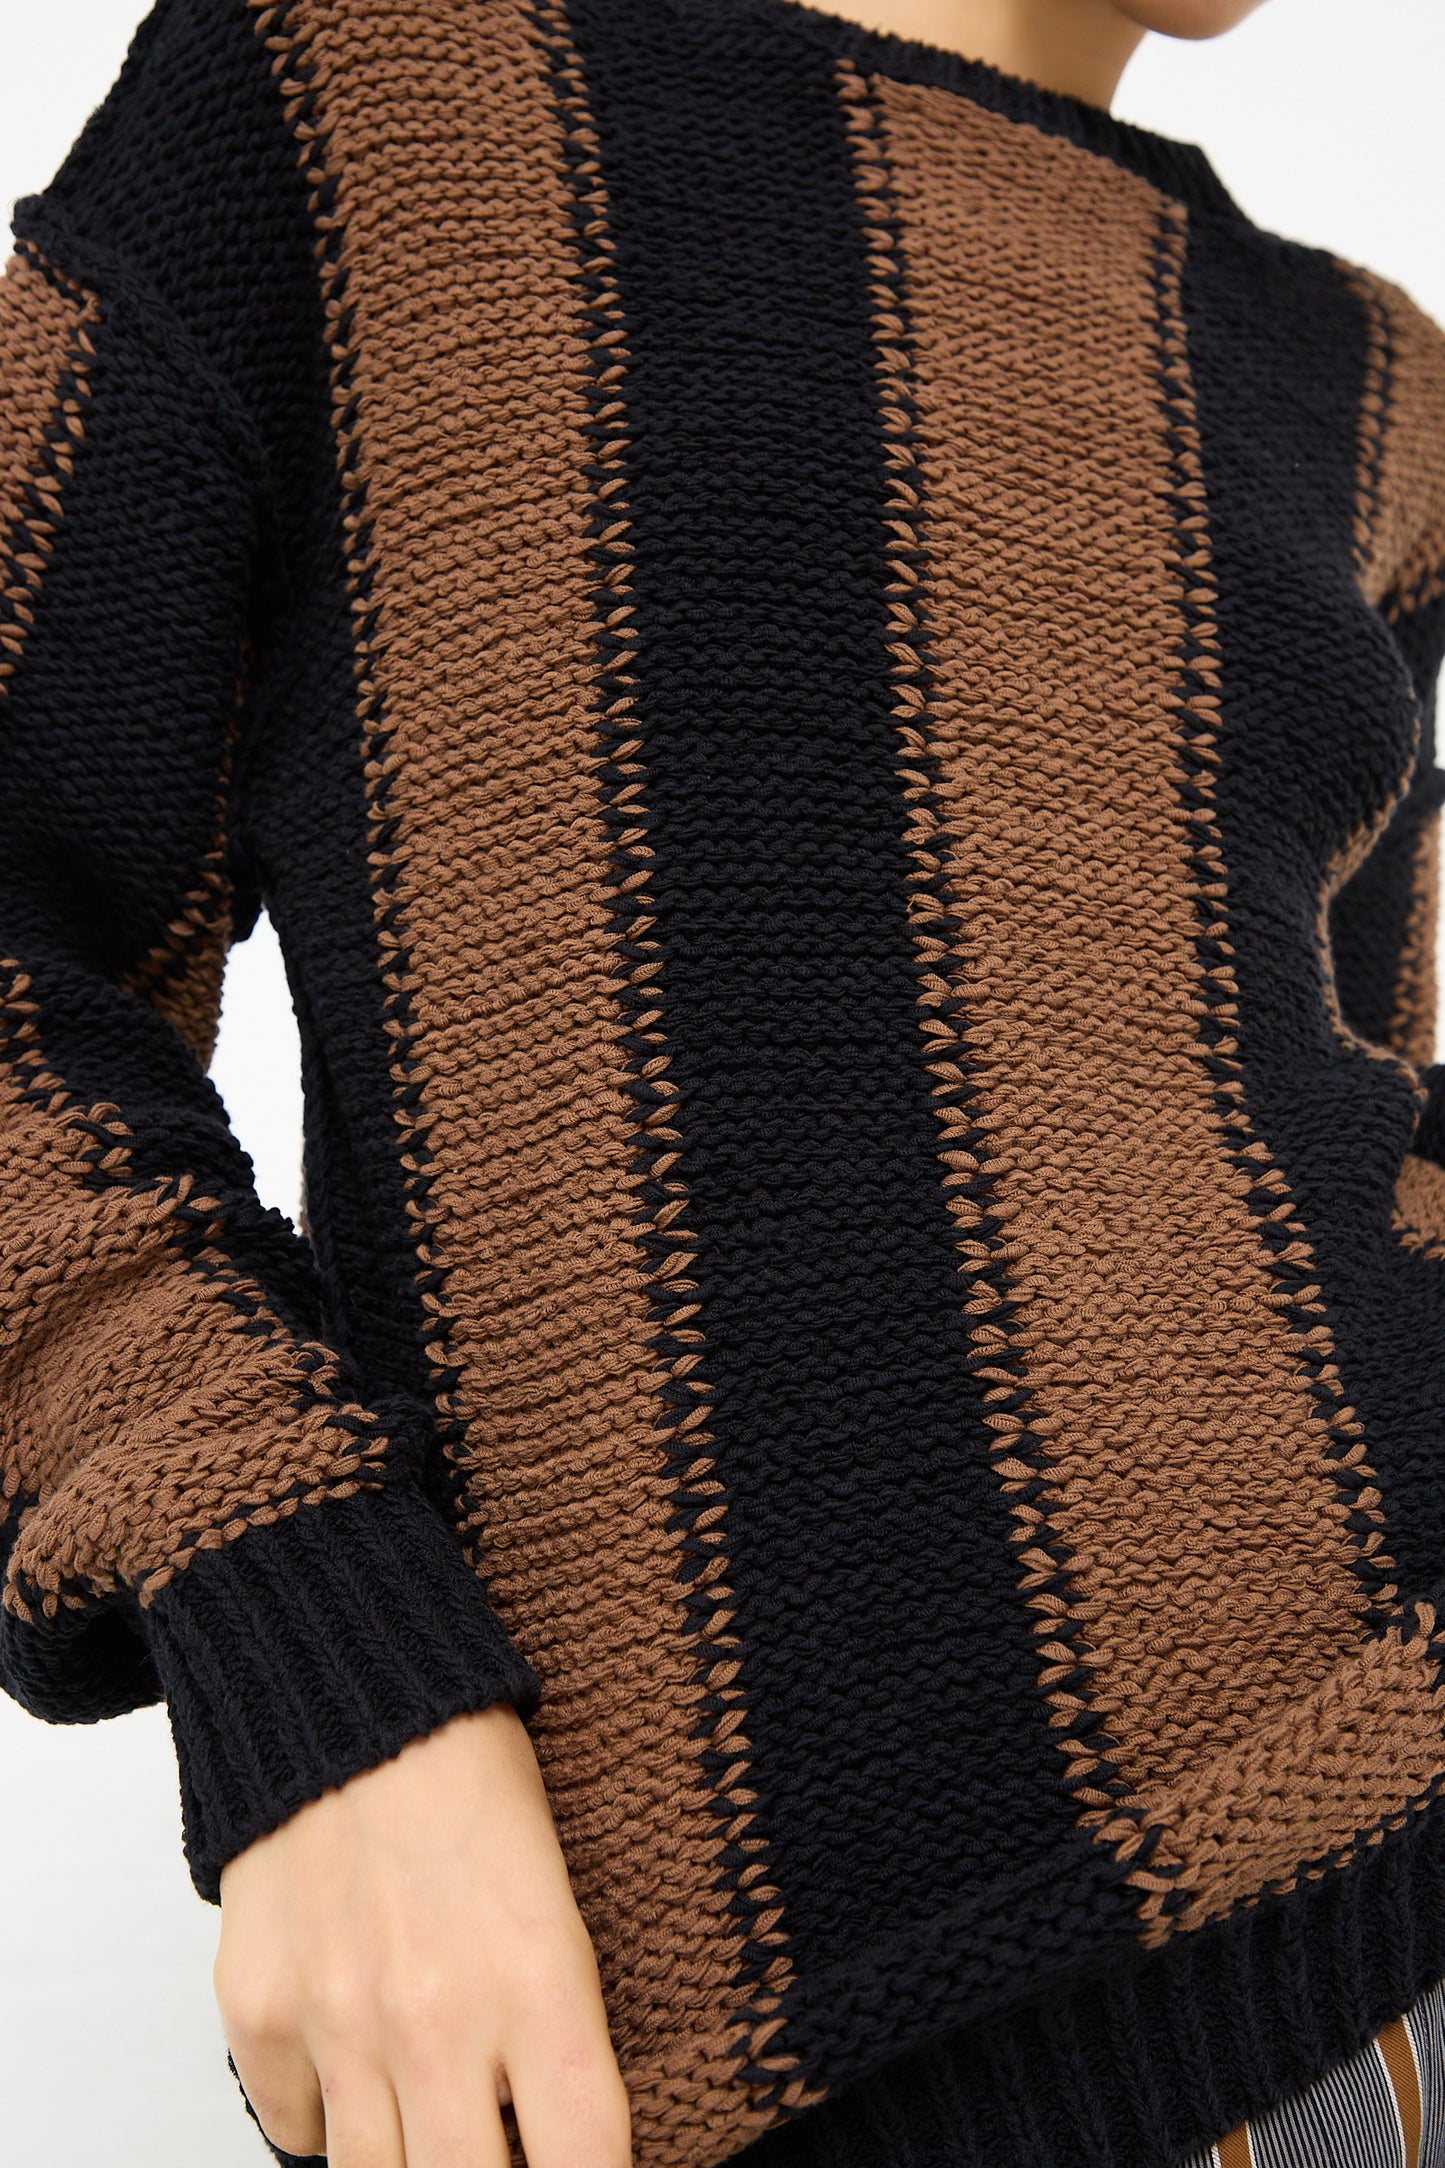 A woman wearing a Cristaseya Fettuccia Striped Sweater in Black and Noisette with dropped shoulders. Front view and up close.